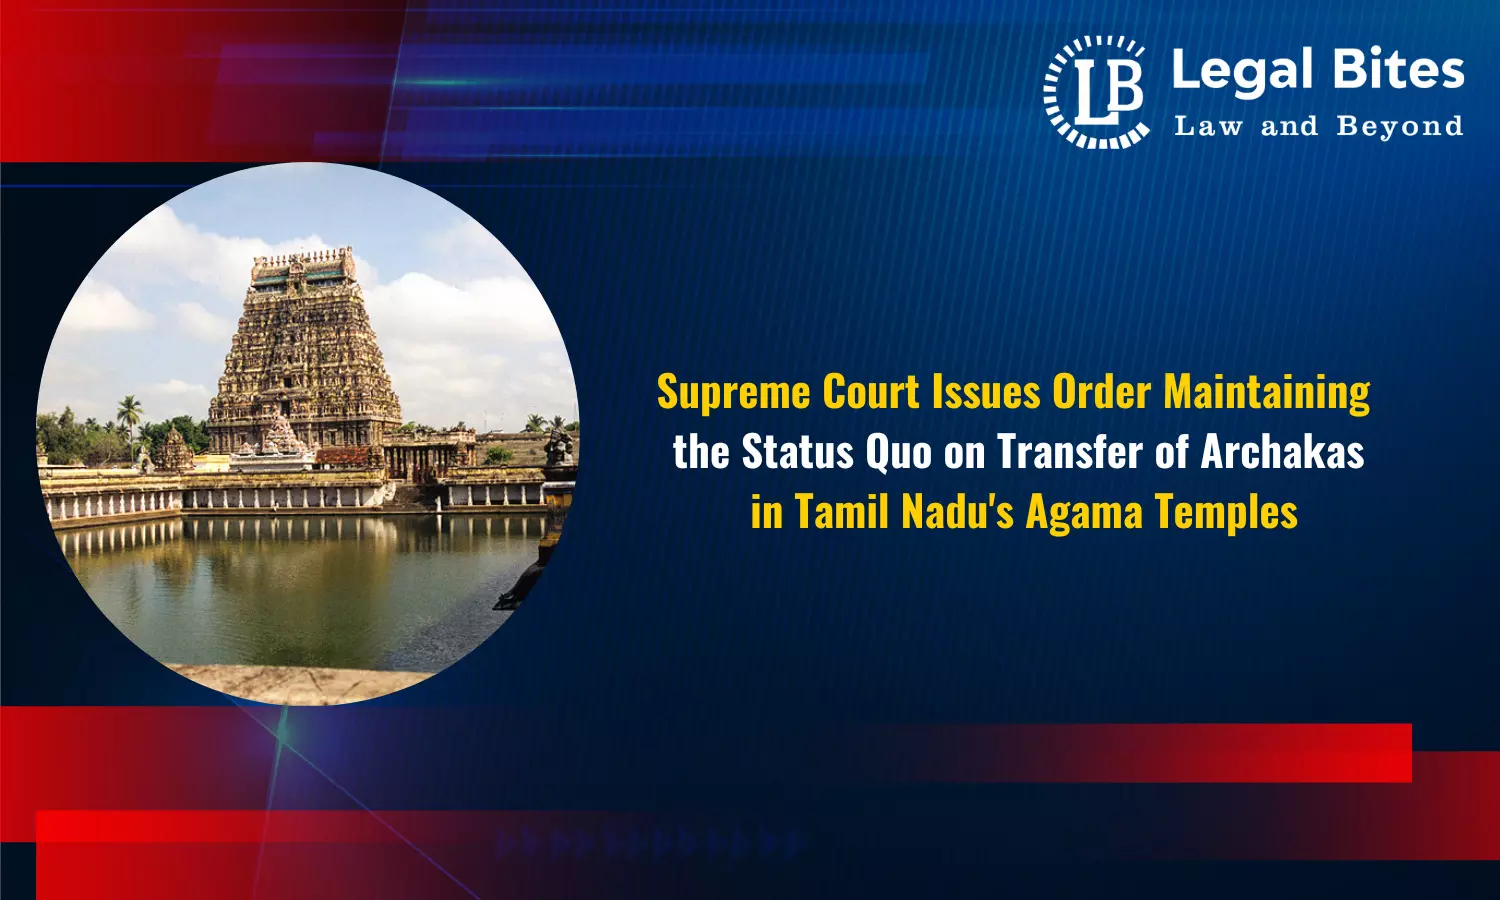 Supreme Court Issues Order Maintaining the Status Quo on Transfer of Archakas in Tamil Nadus Agama Temples